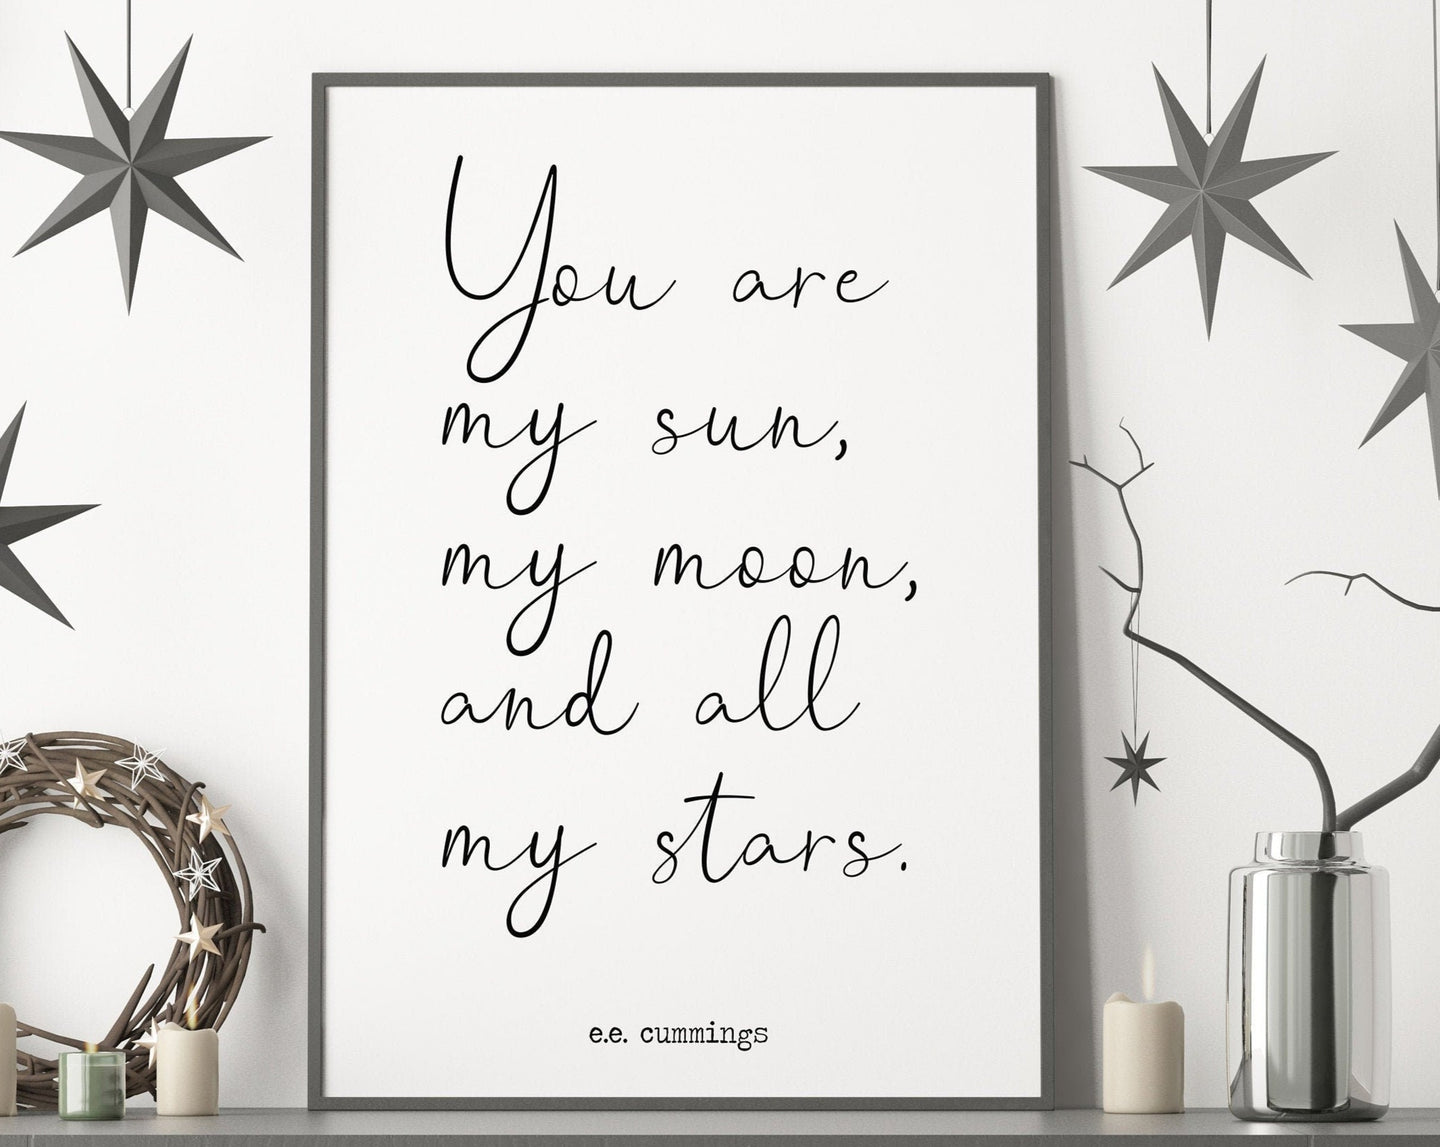 E.E. Cummings quote you are my sun, my moon, and all my stars  Art Print Home Decor poetry wall art love quote home decor UNFRAMED